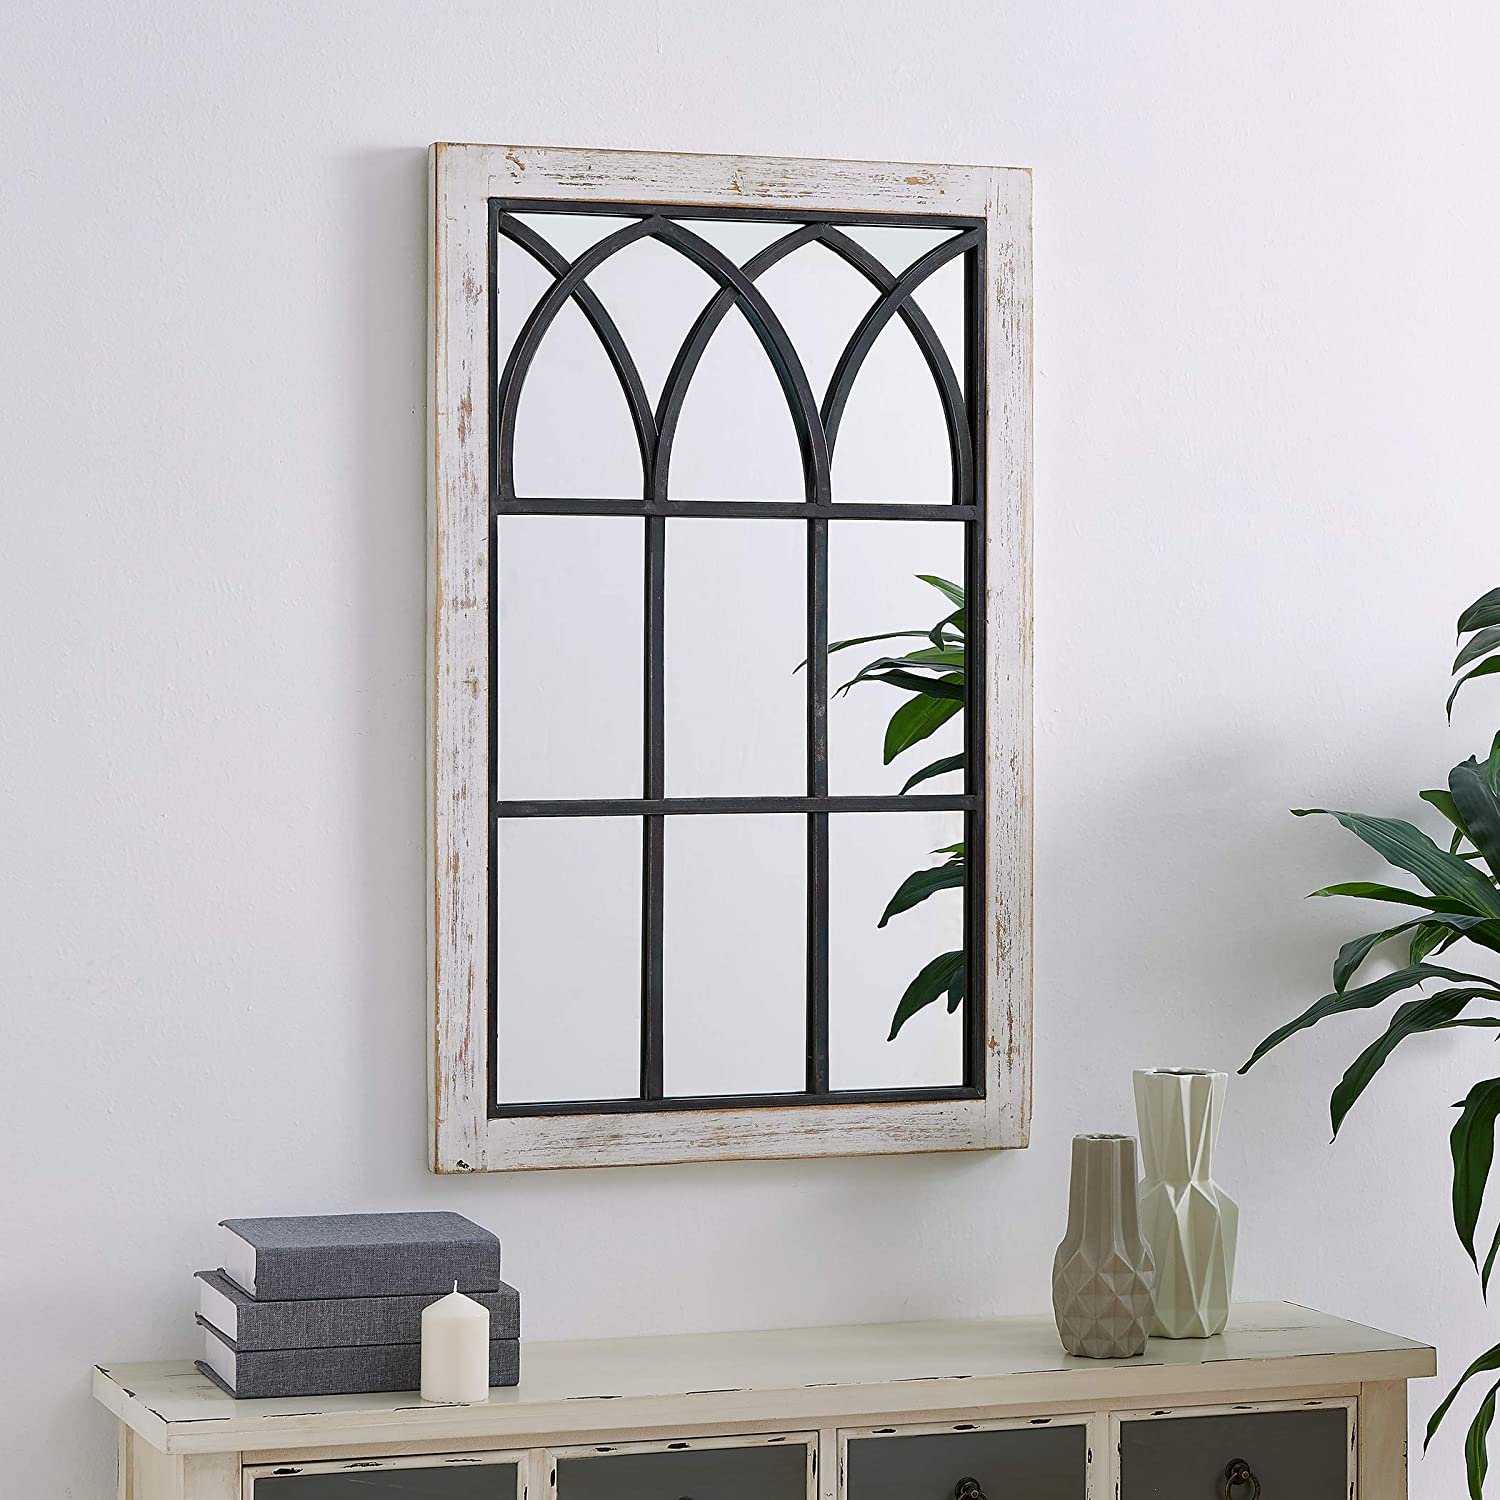 FirsTime &amp; Co. Vista Arched Window Accent Wall Mirror, 37.5" x 24", Distressed White